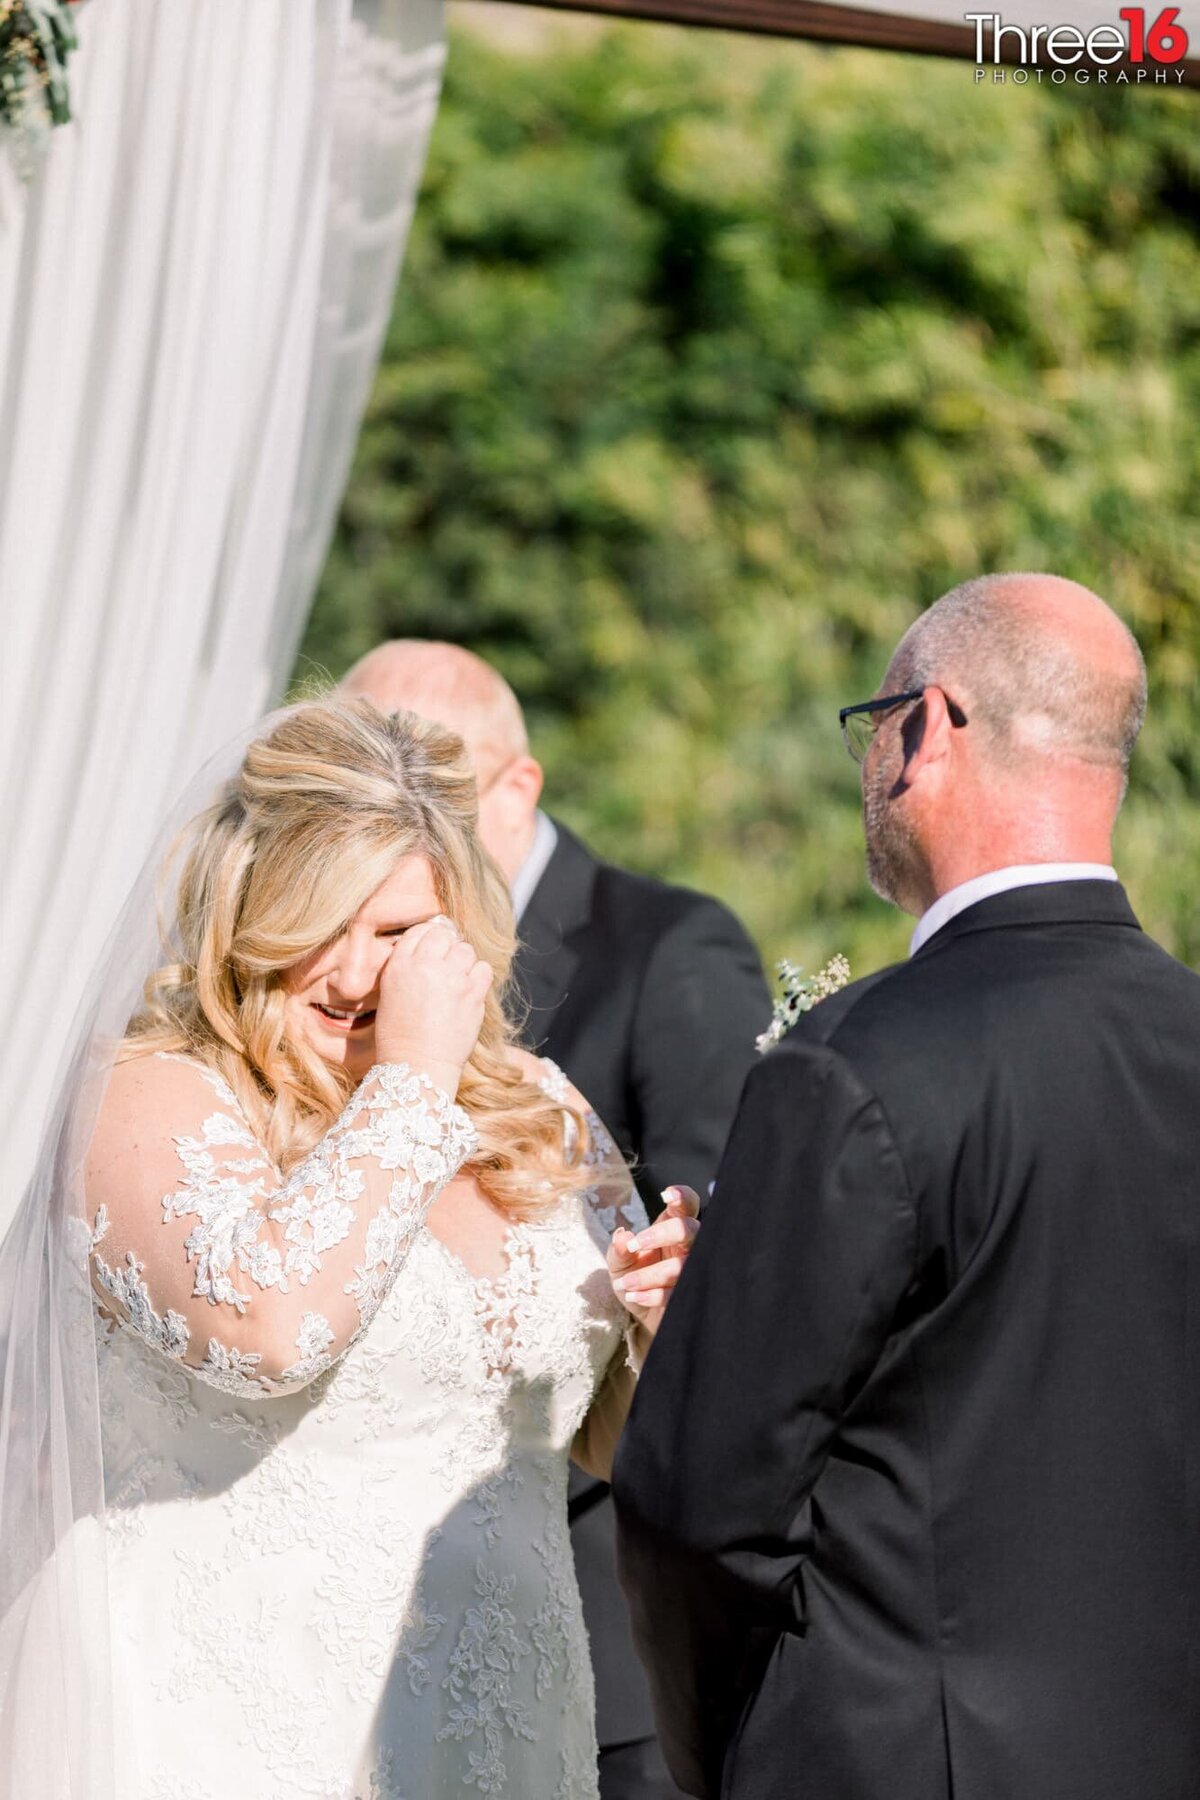 Bride wipes away a tear during the wedding ceremony